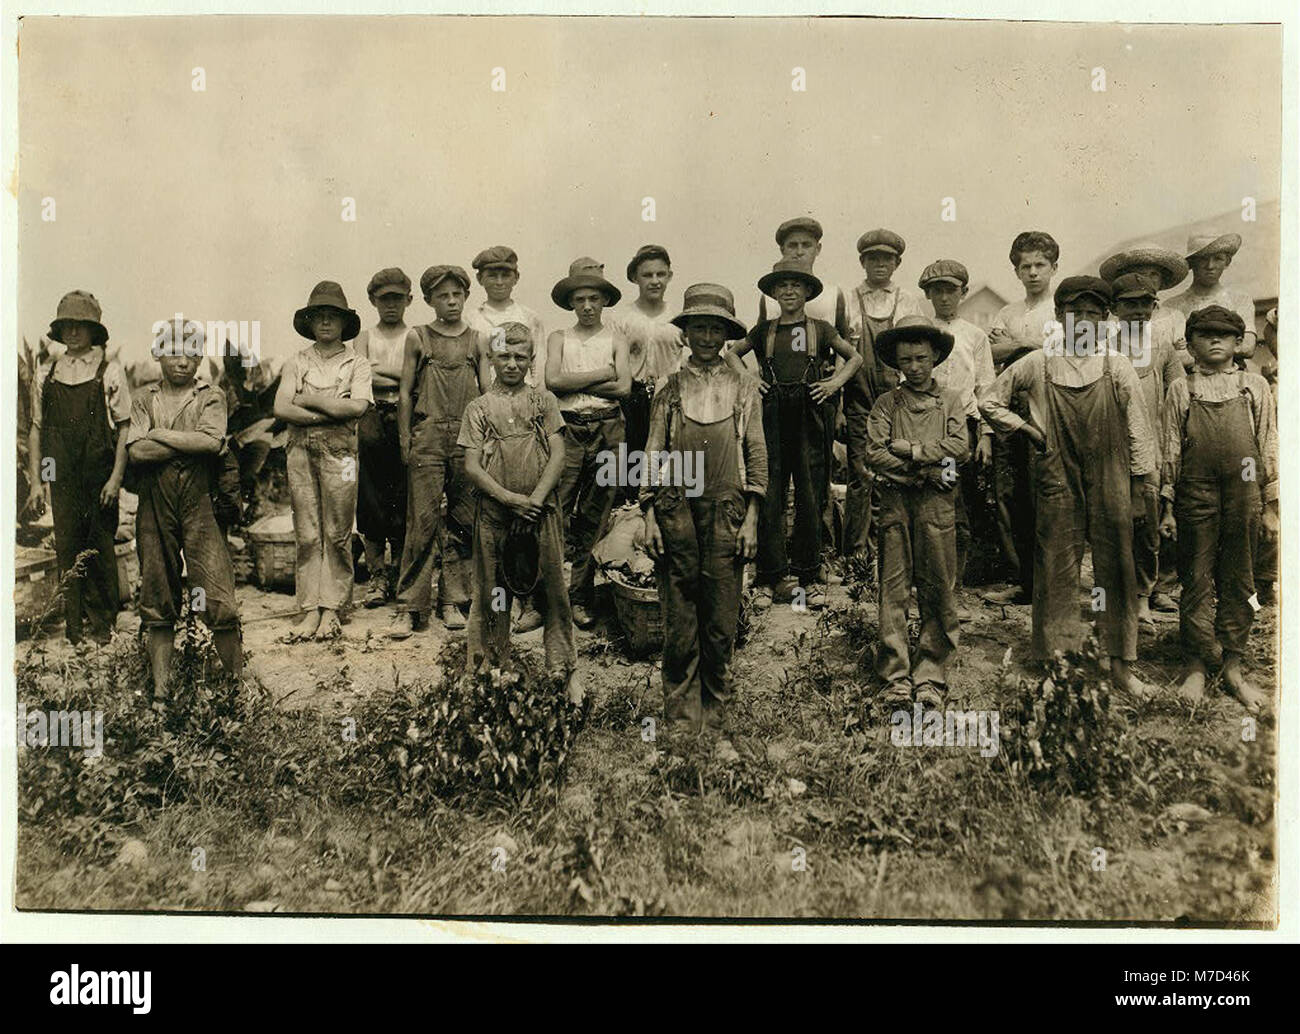 Group of field-workers at Hunttings' Tobacco Farm. One of 9 years, two of 11 yrs., 8 of 12 yrs., 5 of 13 yrs., 3 of 14 yrs., 1 of 15. Four of 11 and 12 had gone home and were not counted. LOC nclc.00709 Stock Photo